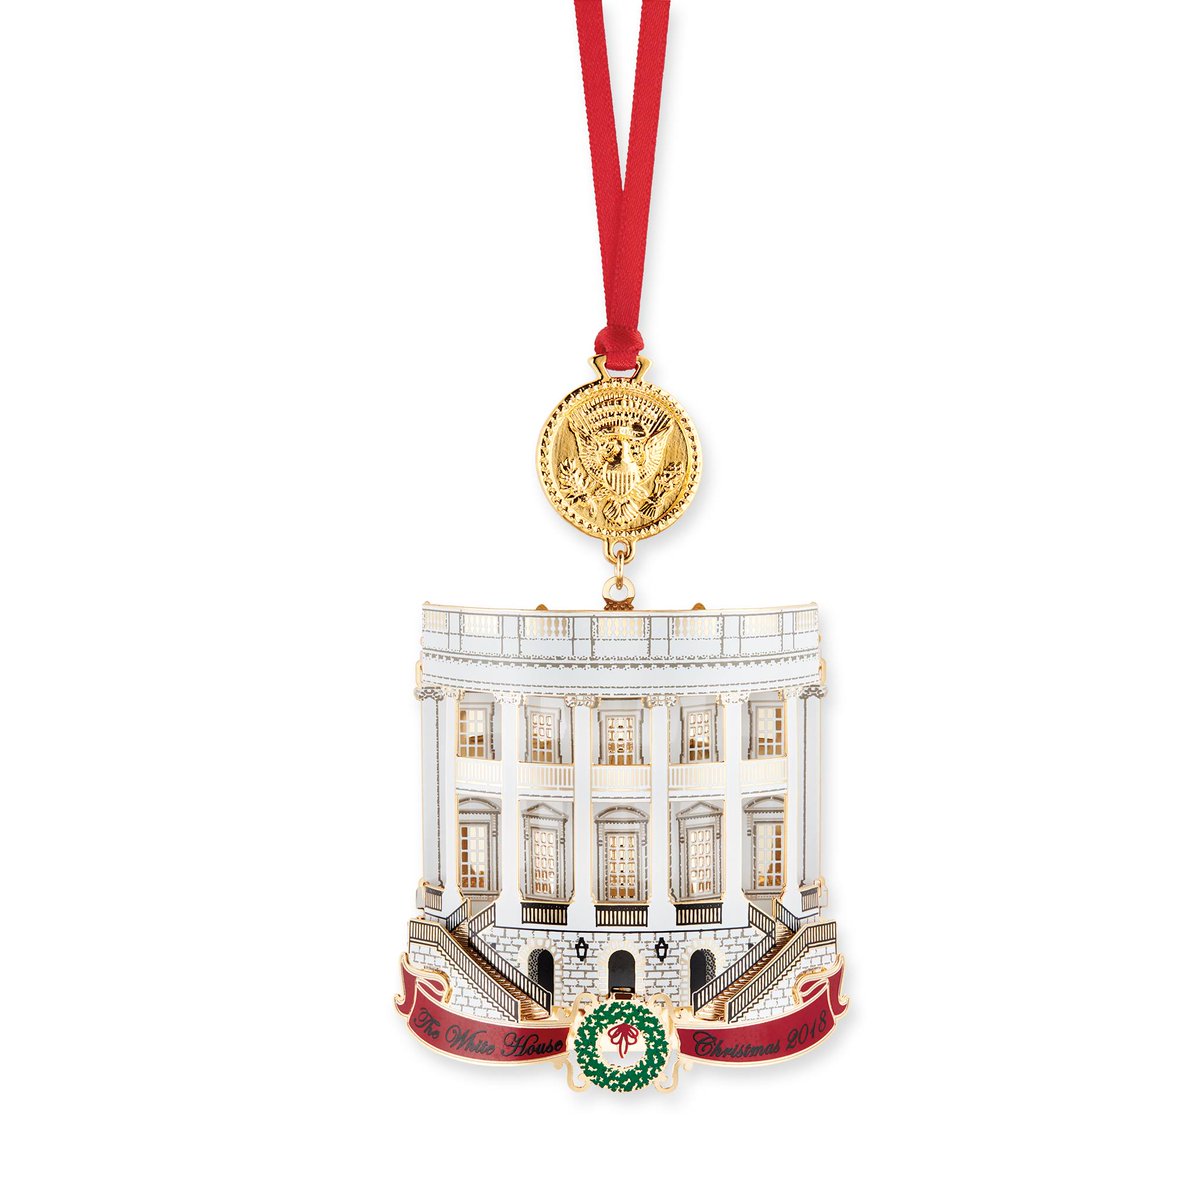 The 2018 ornament celebrates the Truman administration and the major renovations that transformed the White House from 1948–52. The ornament features the new Truman balcony on one side, and a refurbished Blue Room on the other.Buy one for your tree:  https://shop.whitehousehistory.org/holidays/ornaments/official-2018-white-house-christmas-ornament